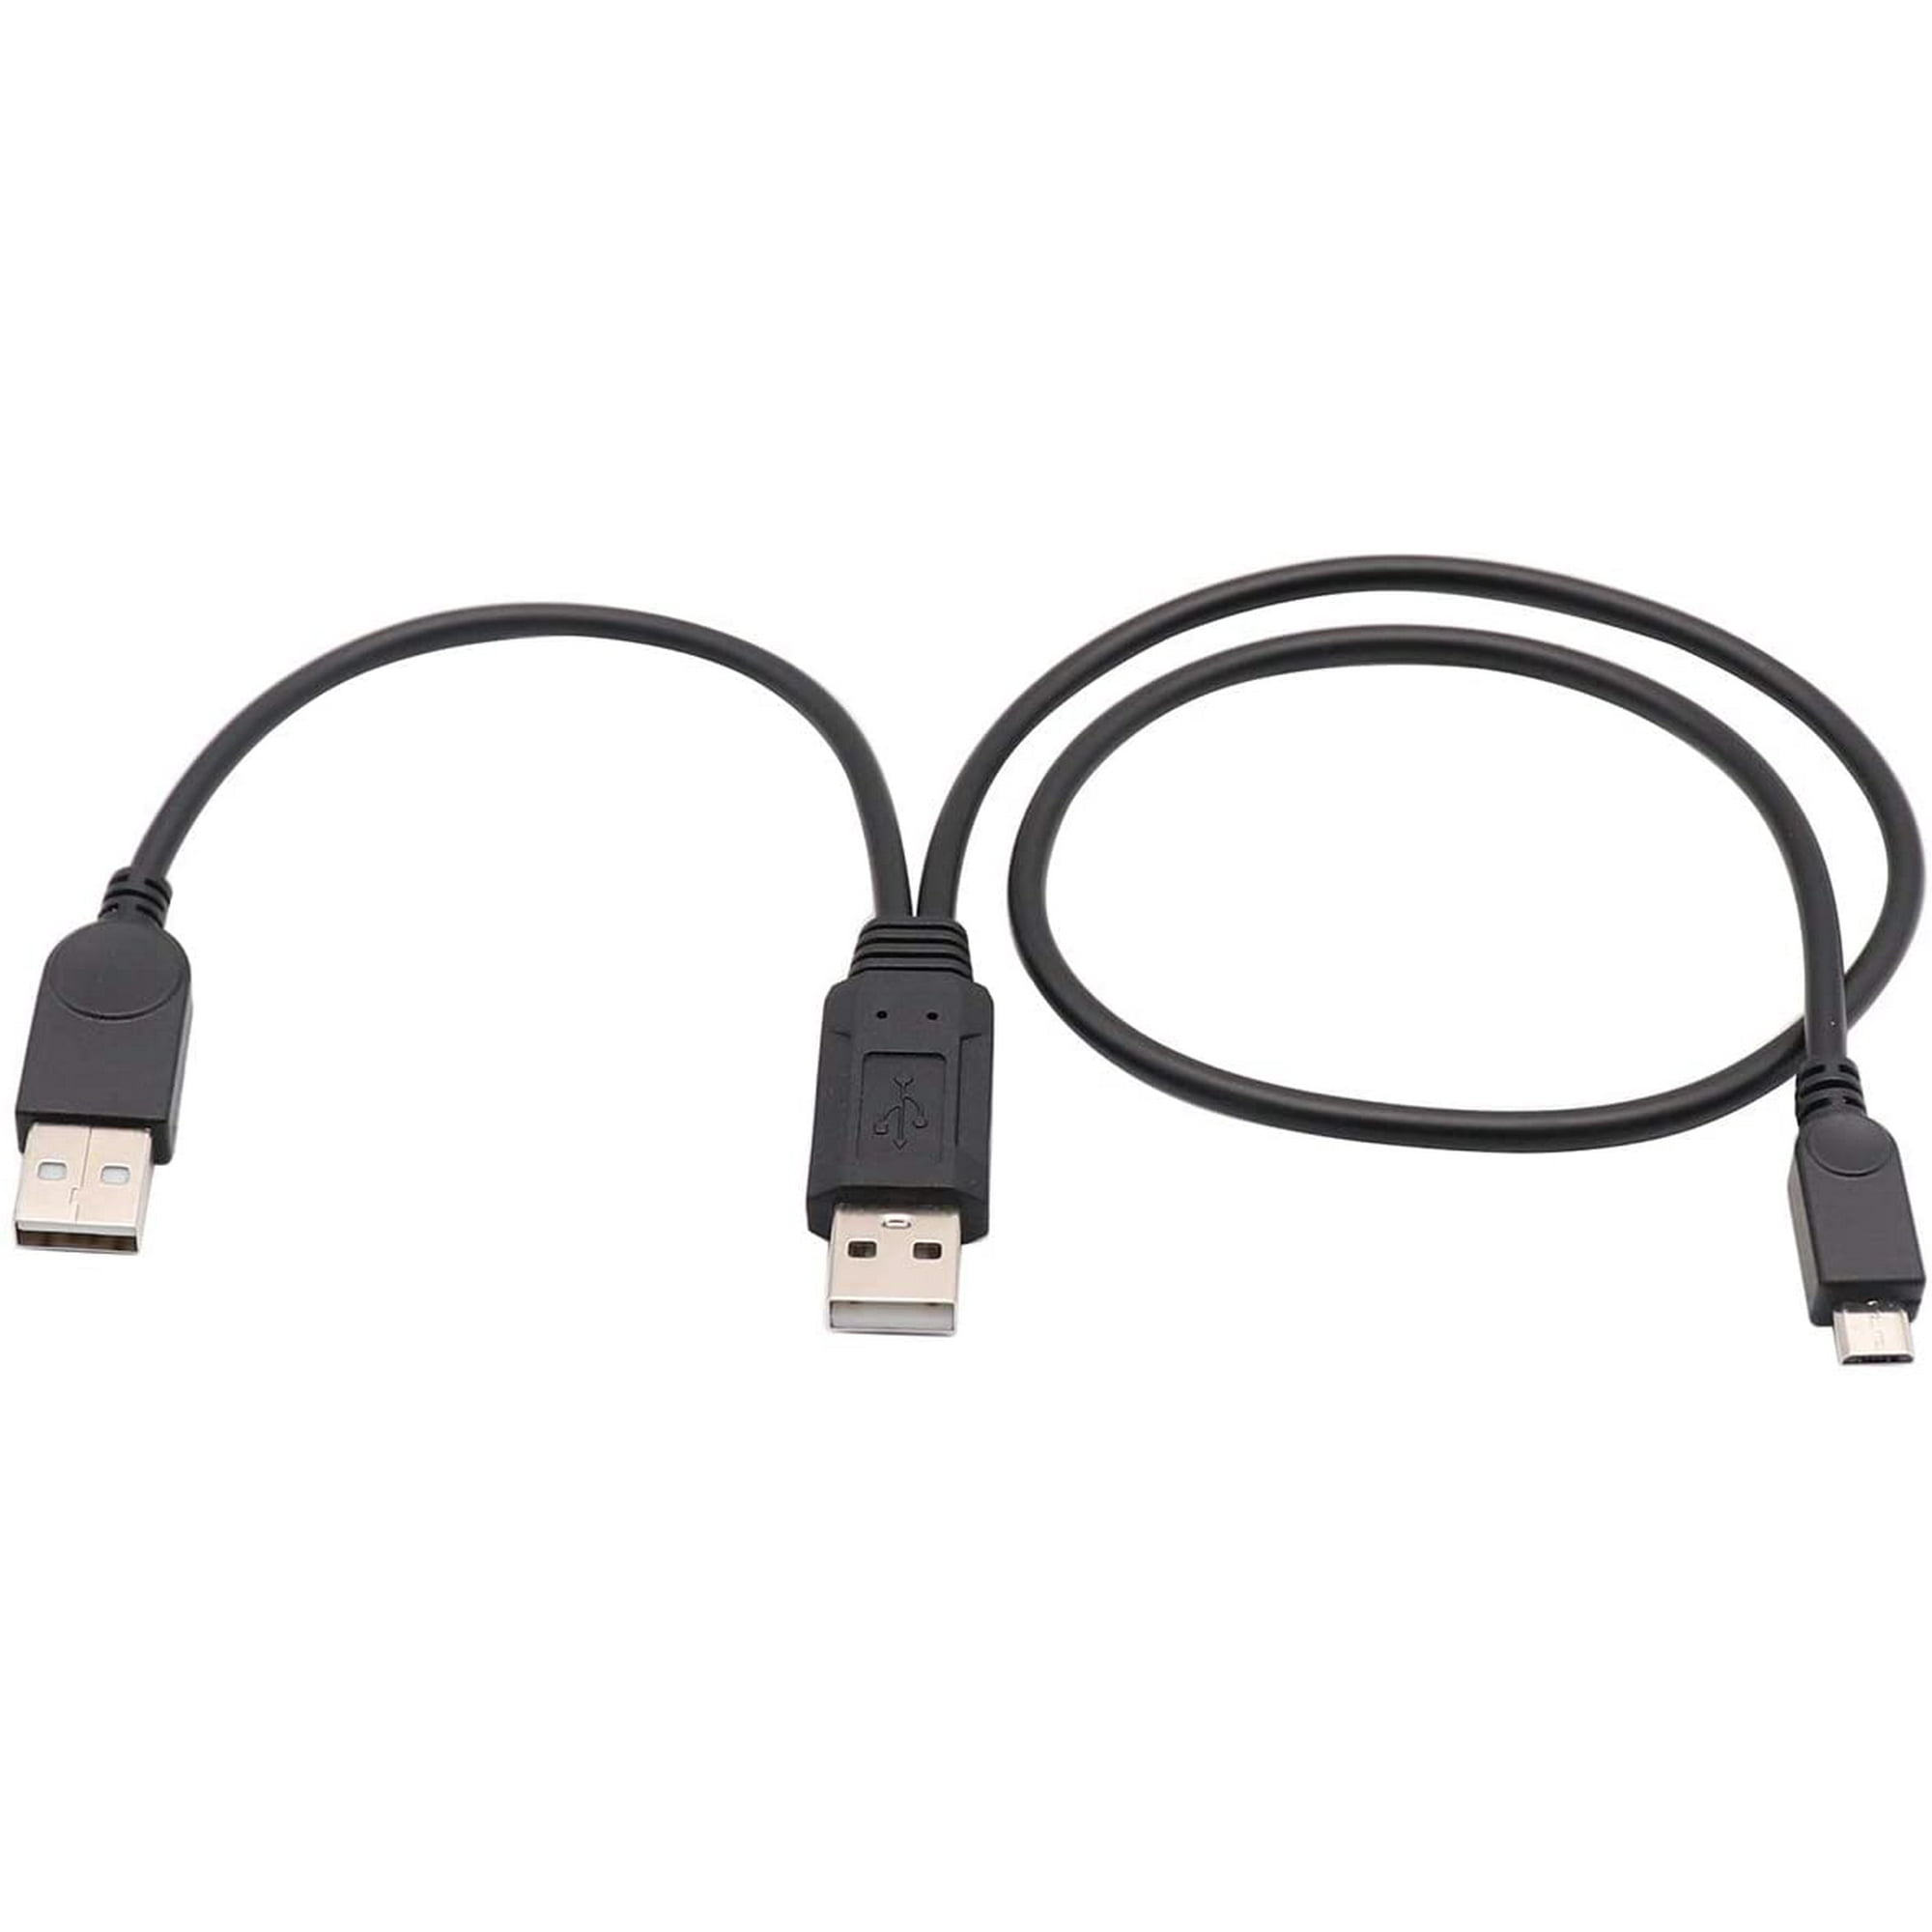 zdyCGTime Dual Power Micro USB Cable, USB 2.0 to Micro USB 5 Pin Y Adapter Cord External Hard Drive - 2 USB A | Walmart Canada